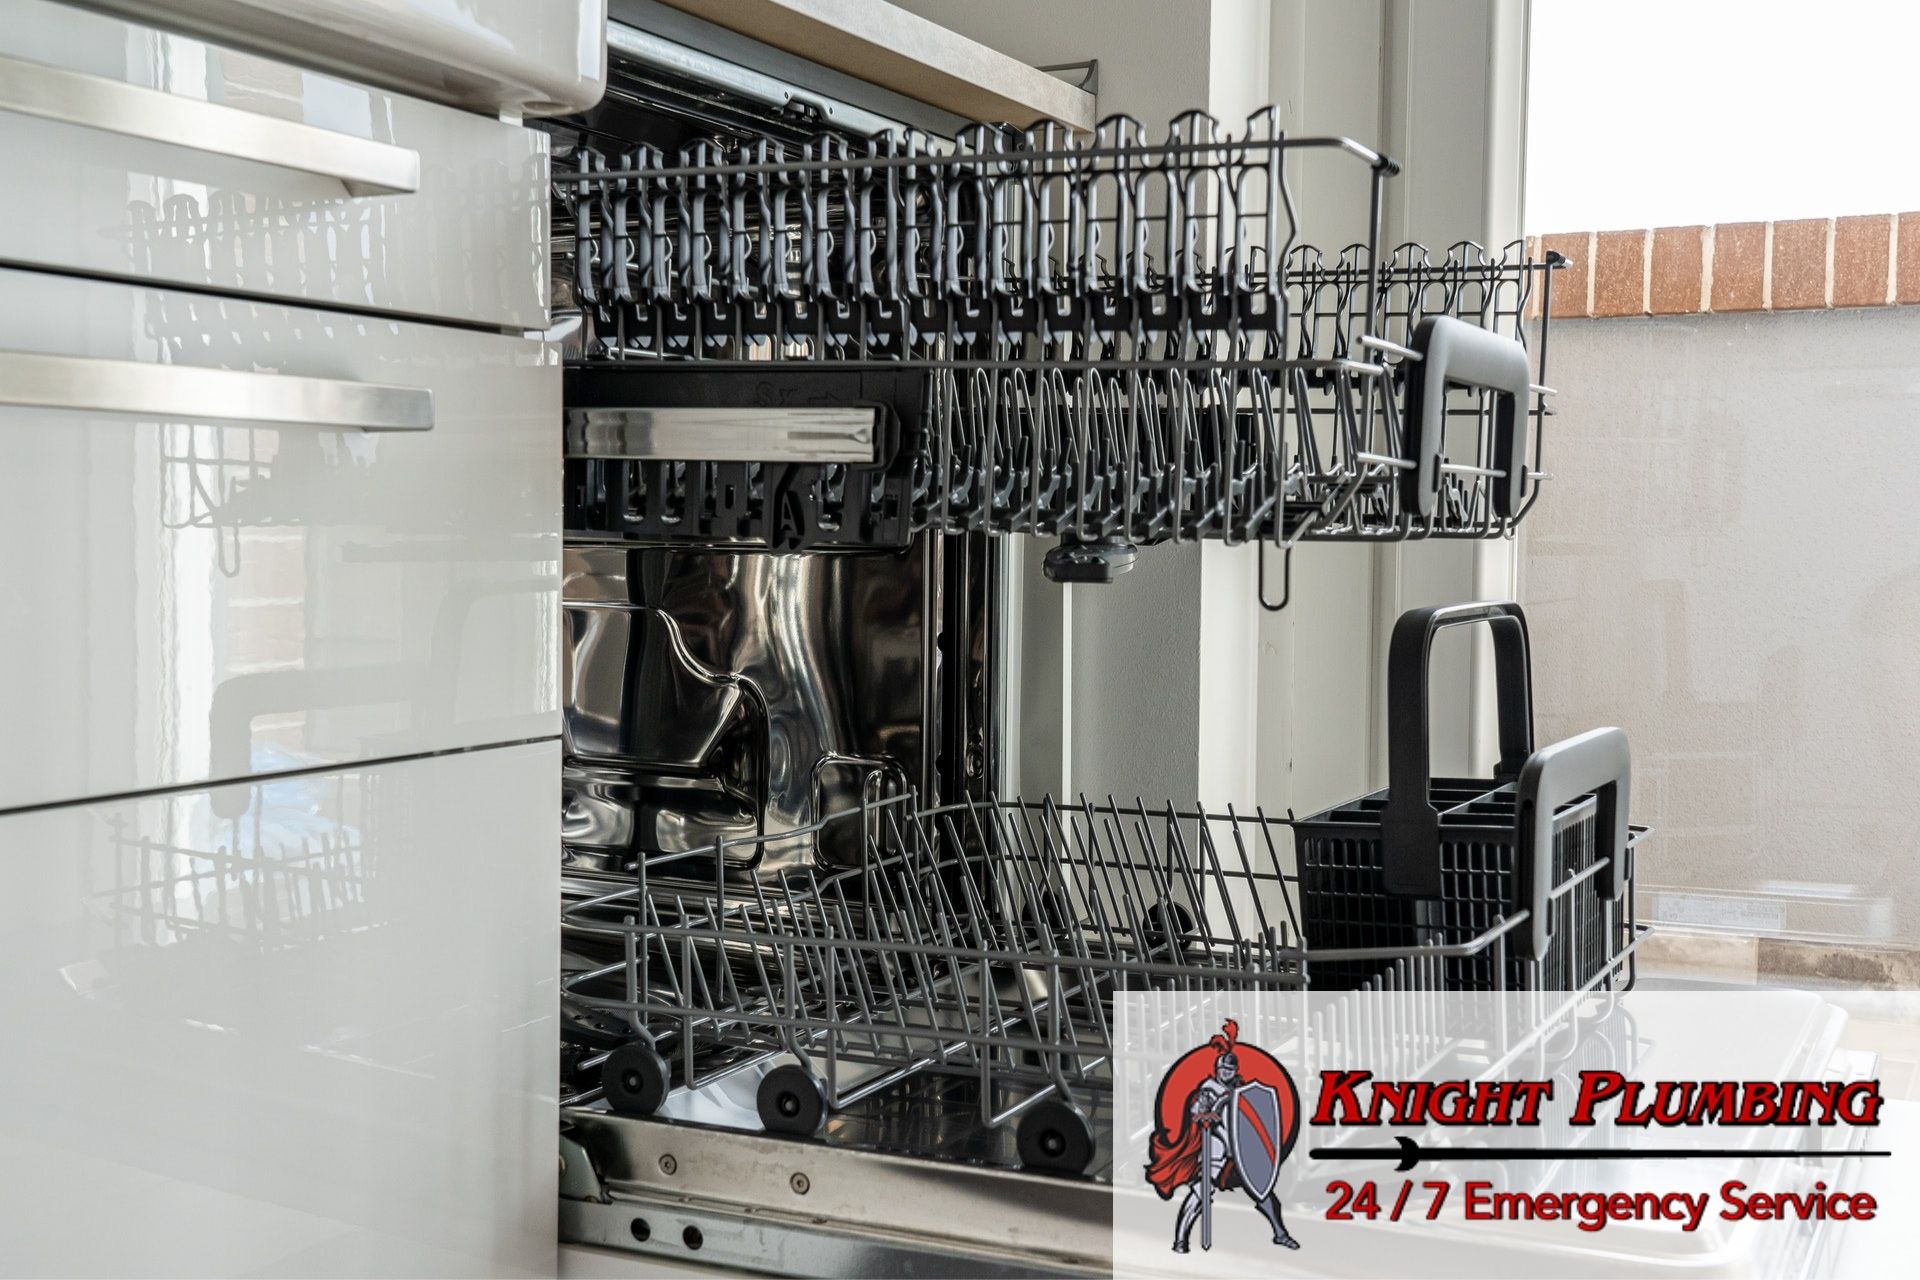 Common Causes For Dishwasher Flooding